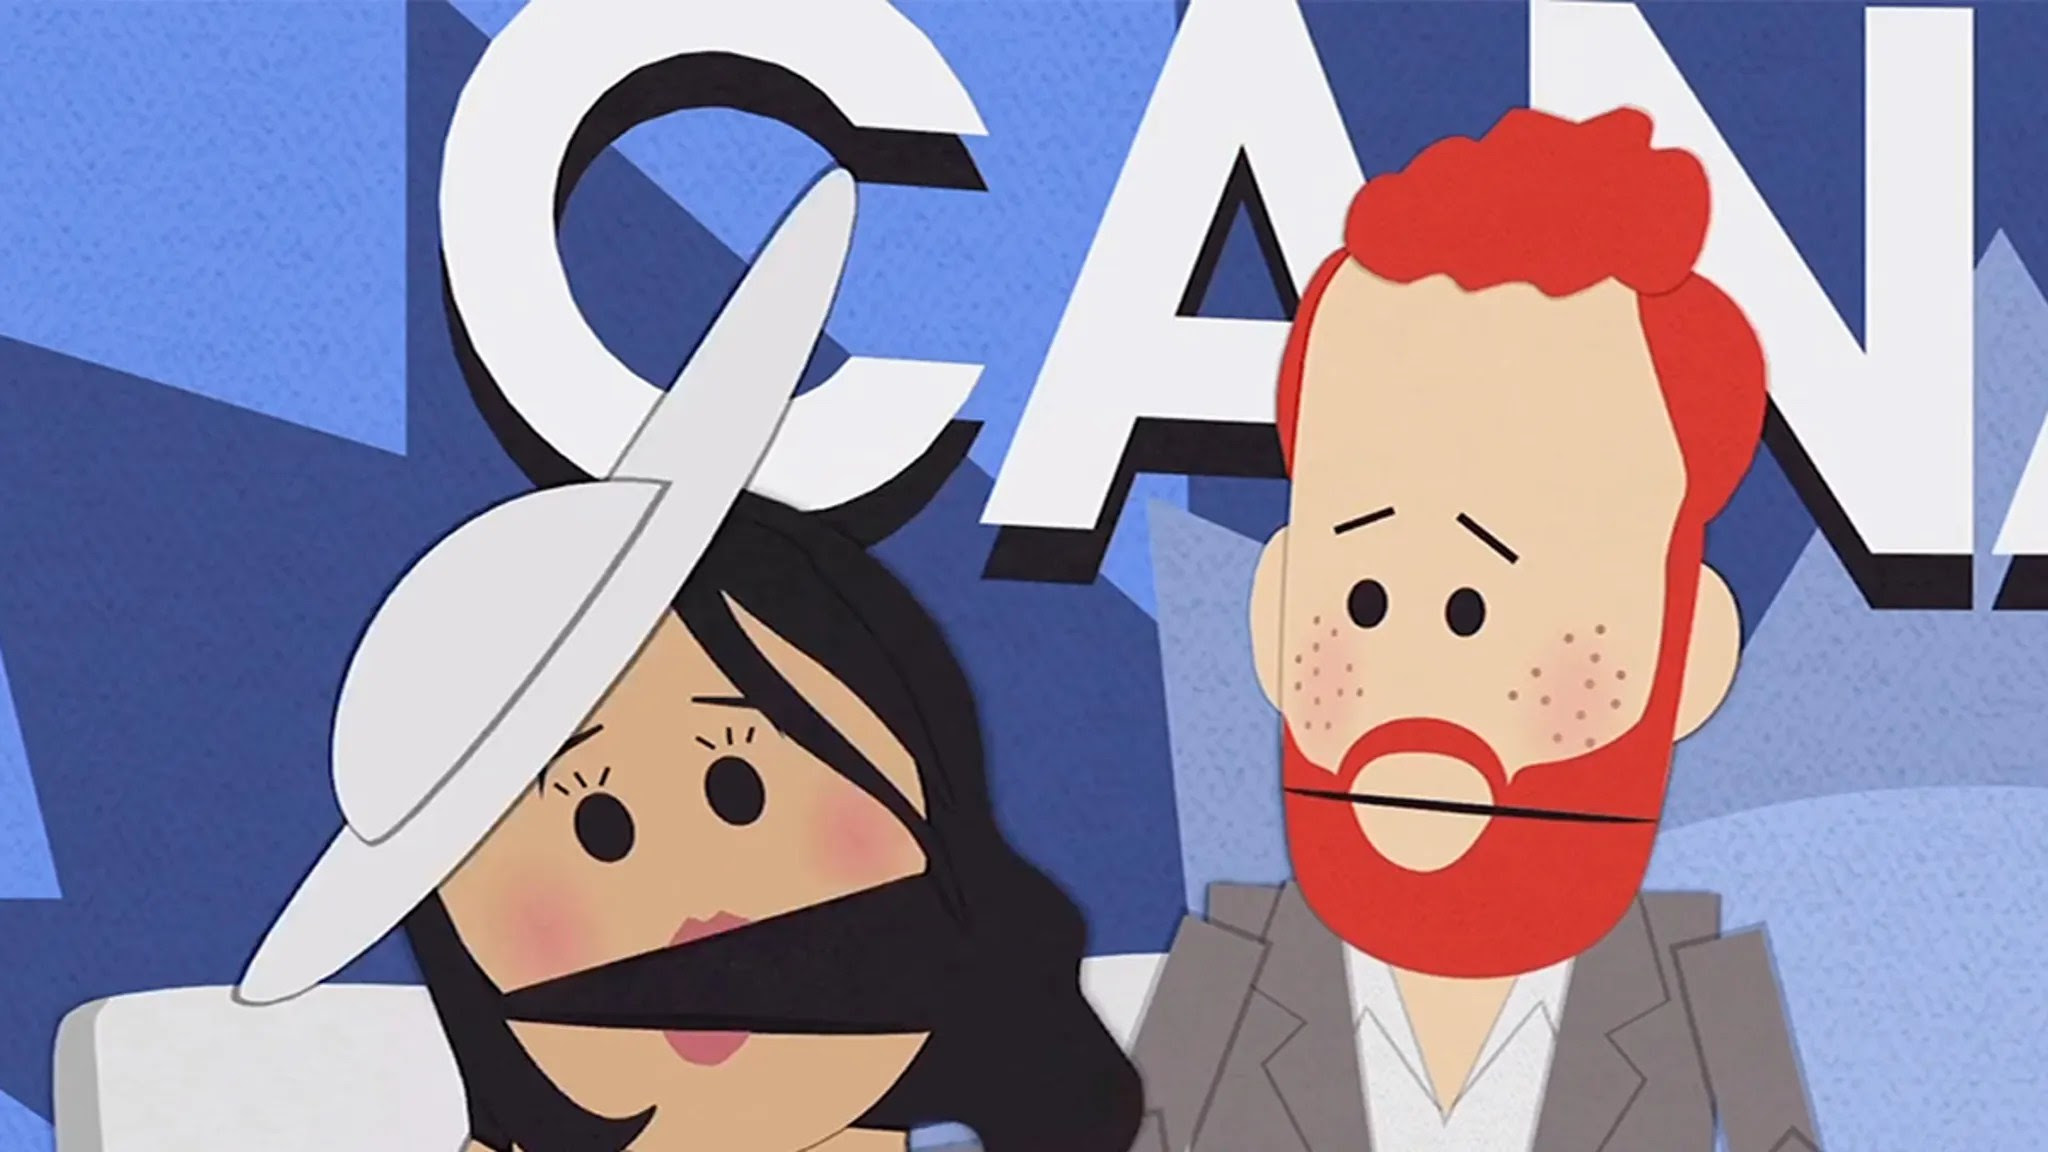 Web “south park” on wednesday roasted prince harry and meghan markle as a cartoonishly clueless couple who clamor for privacy while seeking publicity. 'South Park' Mocks Prince Harry and Meghan Markle